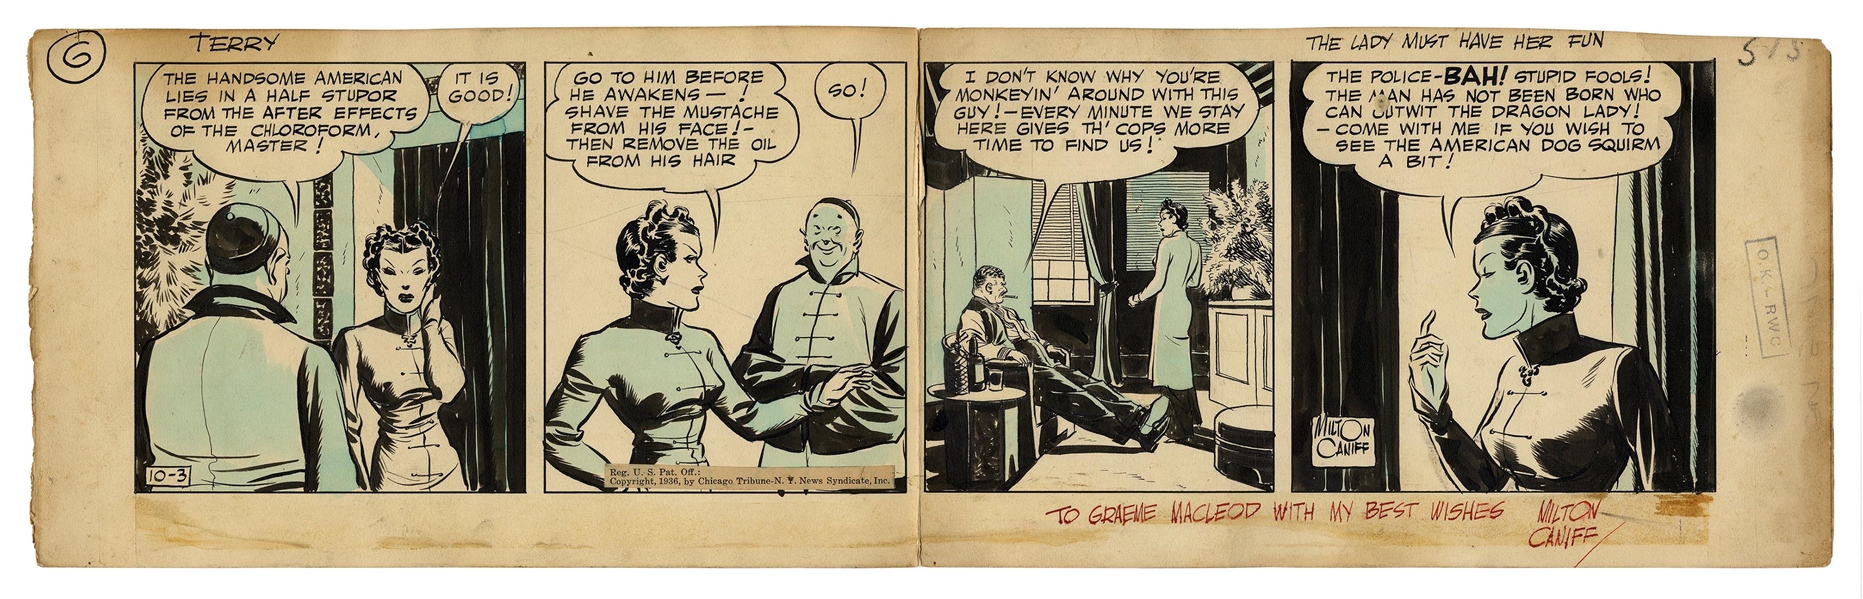 ''Terry and the Pirates'' Original Comic Strip by Milton Caniff From 1936 -- The Dragon Lady Has ''Her Fun'' by Drugging the ''Handsome American''